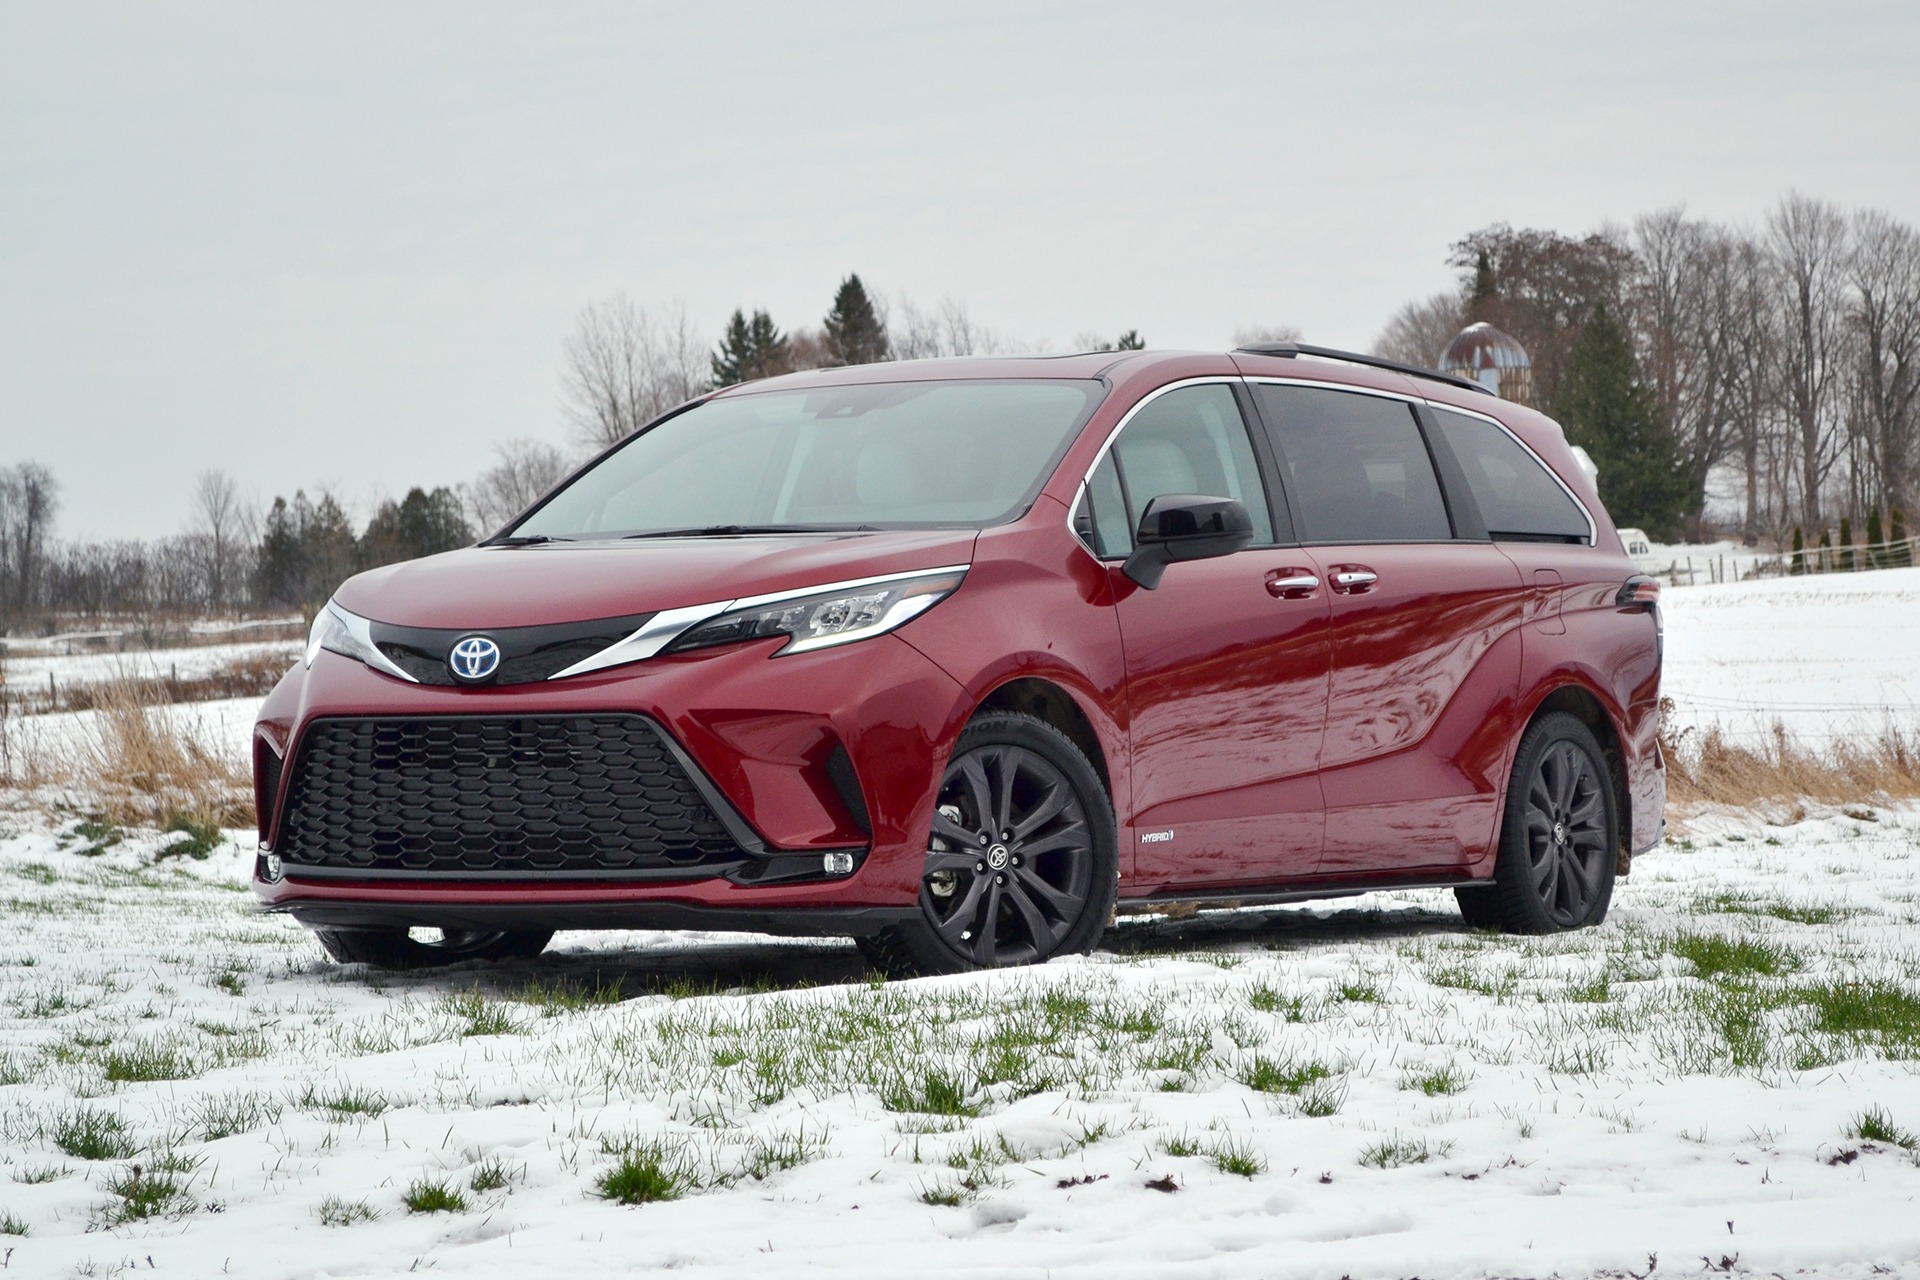 2021 Toyota Sienna Review: First Drive - AutoGuide.com